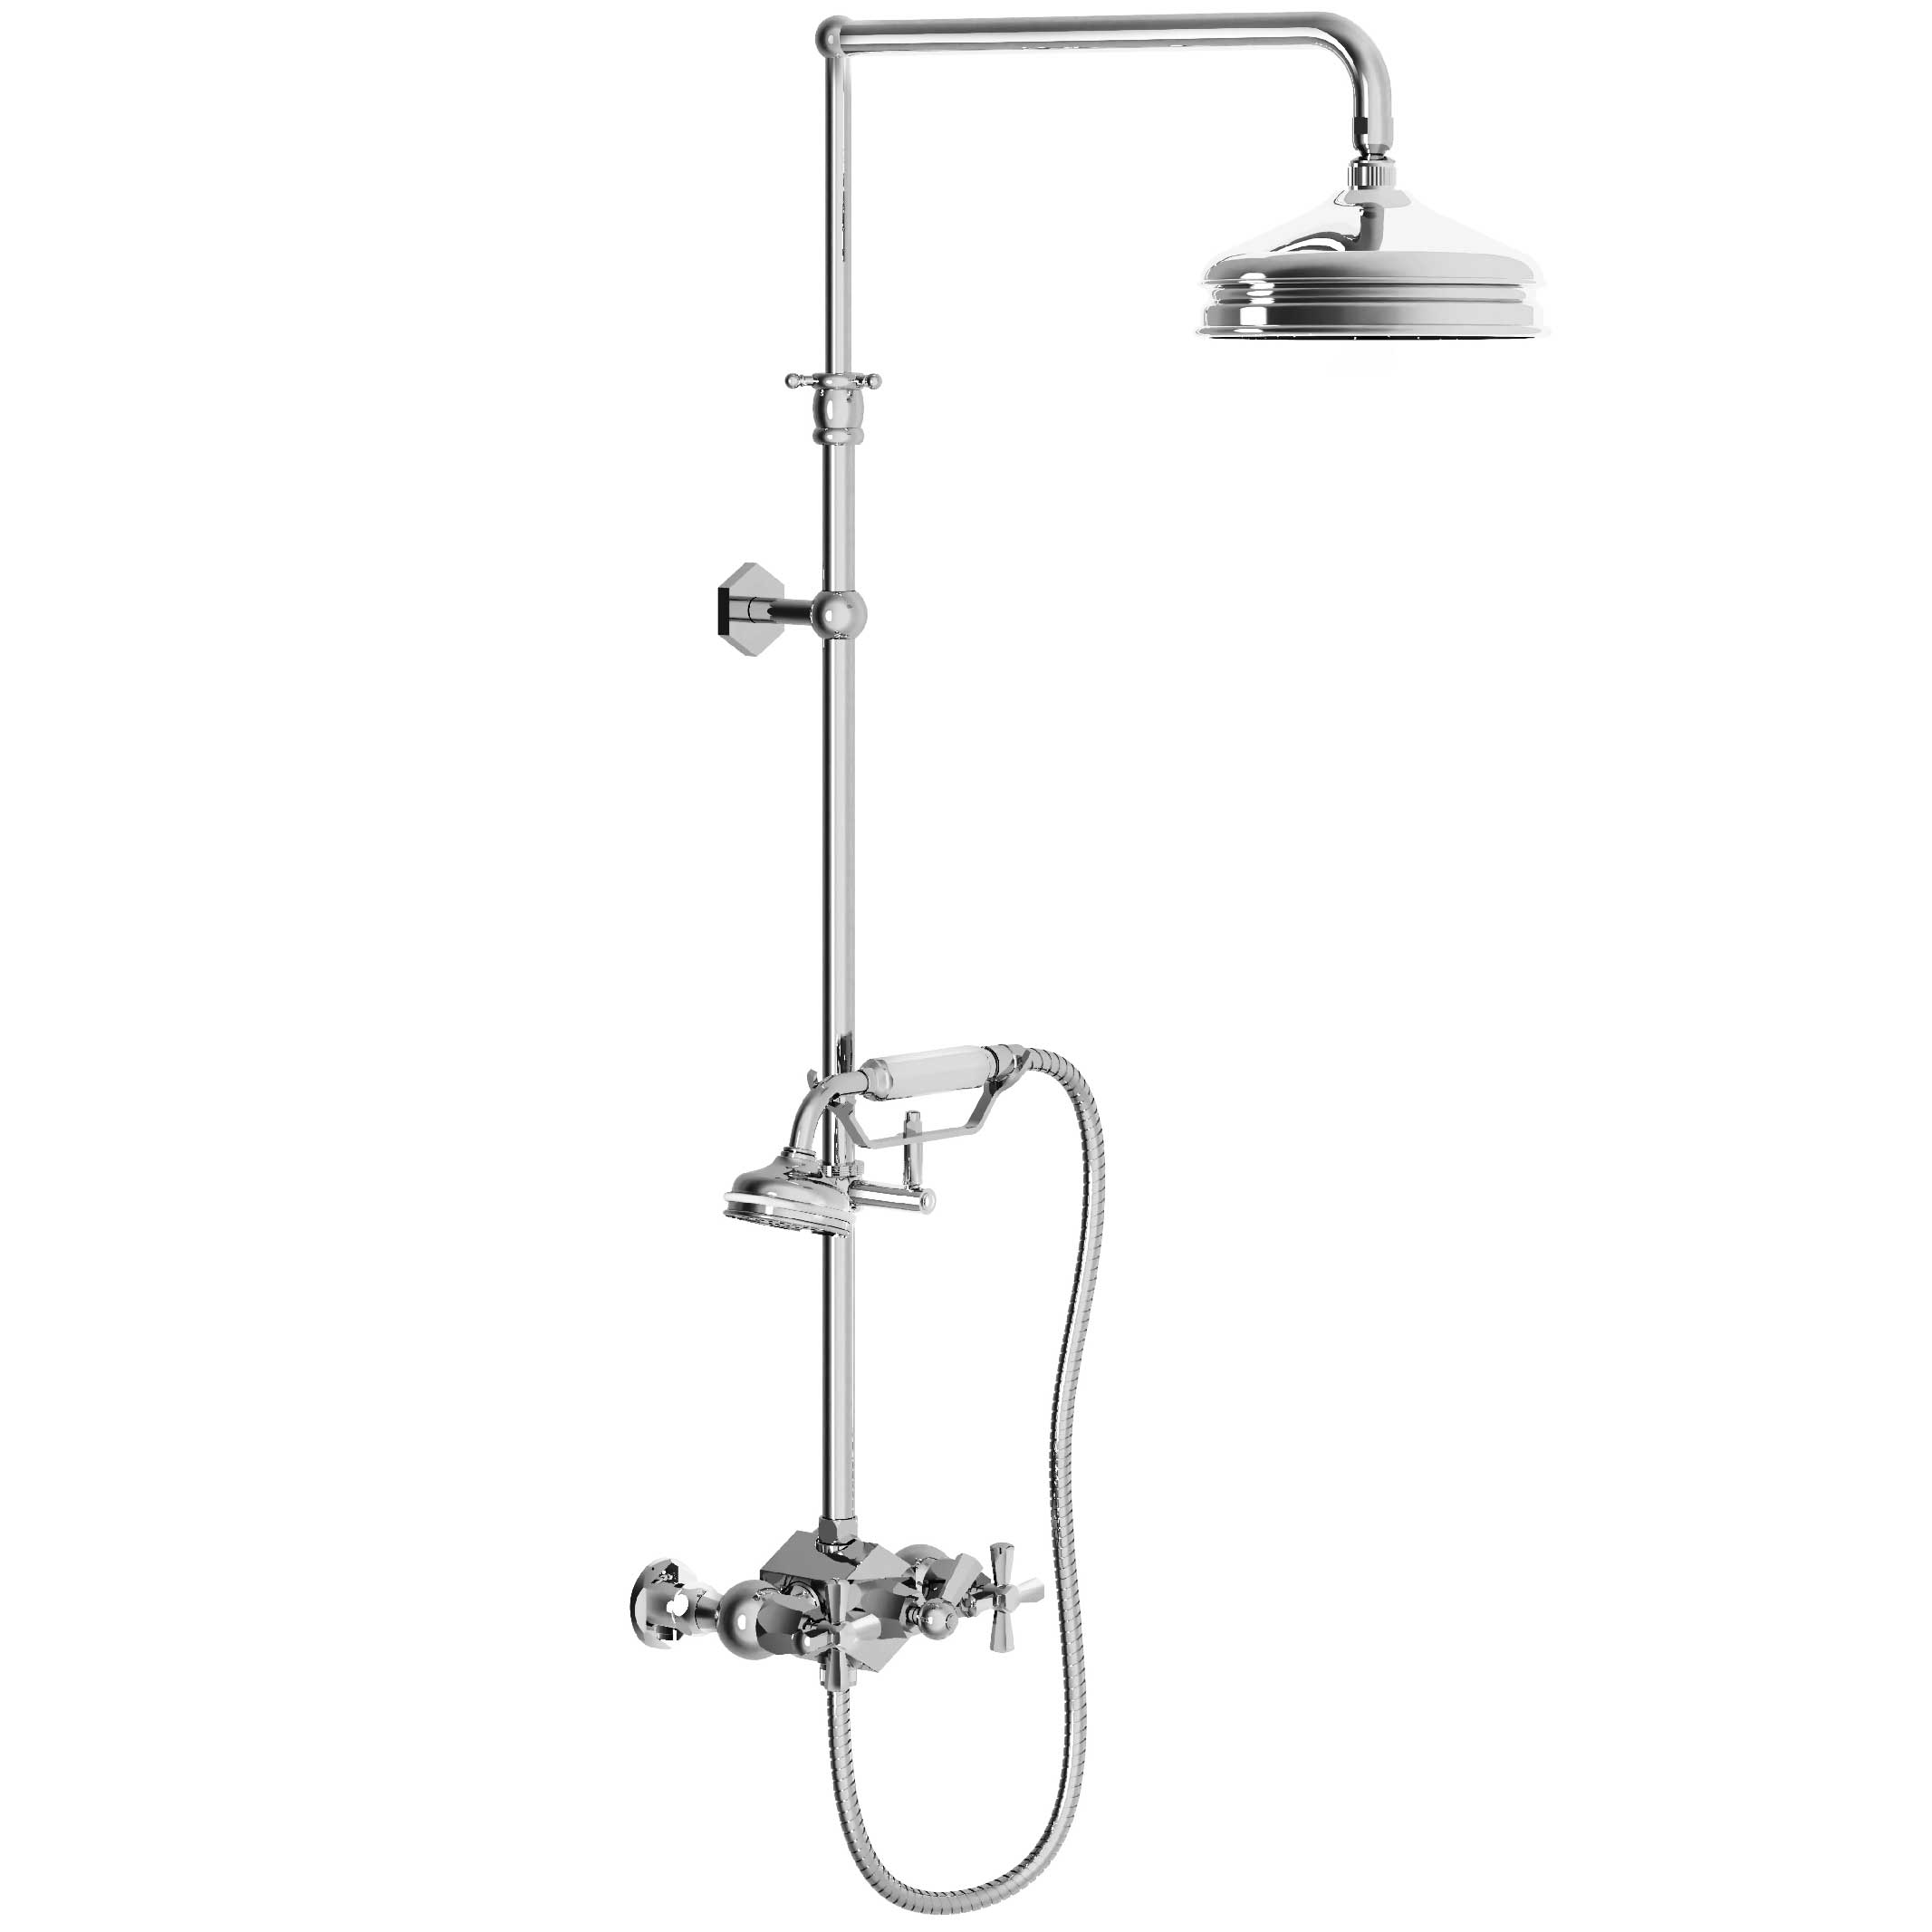 M13-2204 Shower mixer with column, anti-scaling